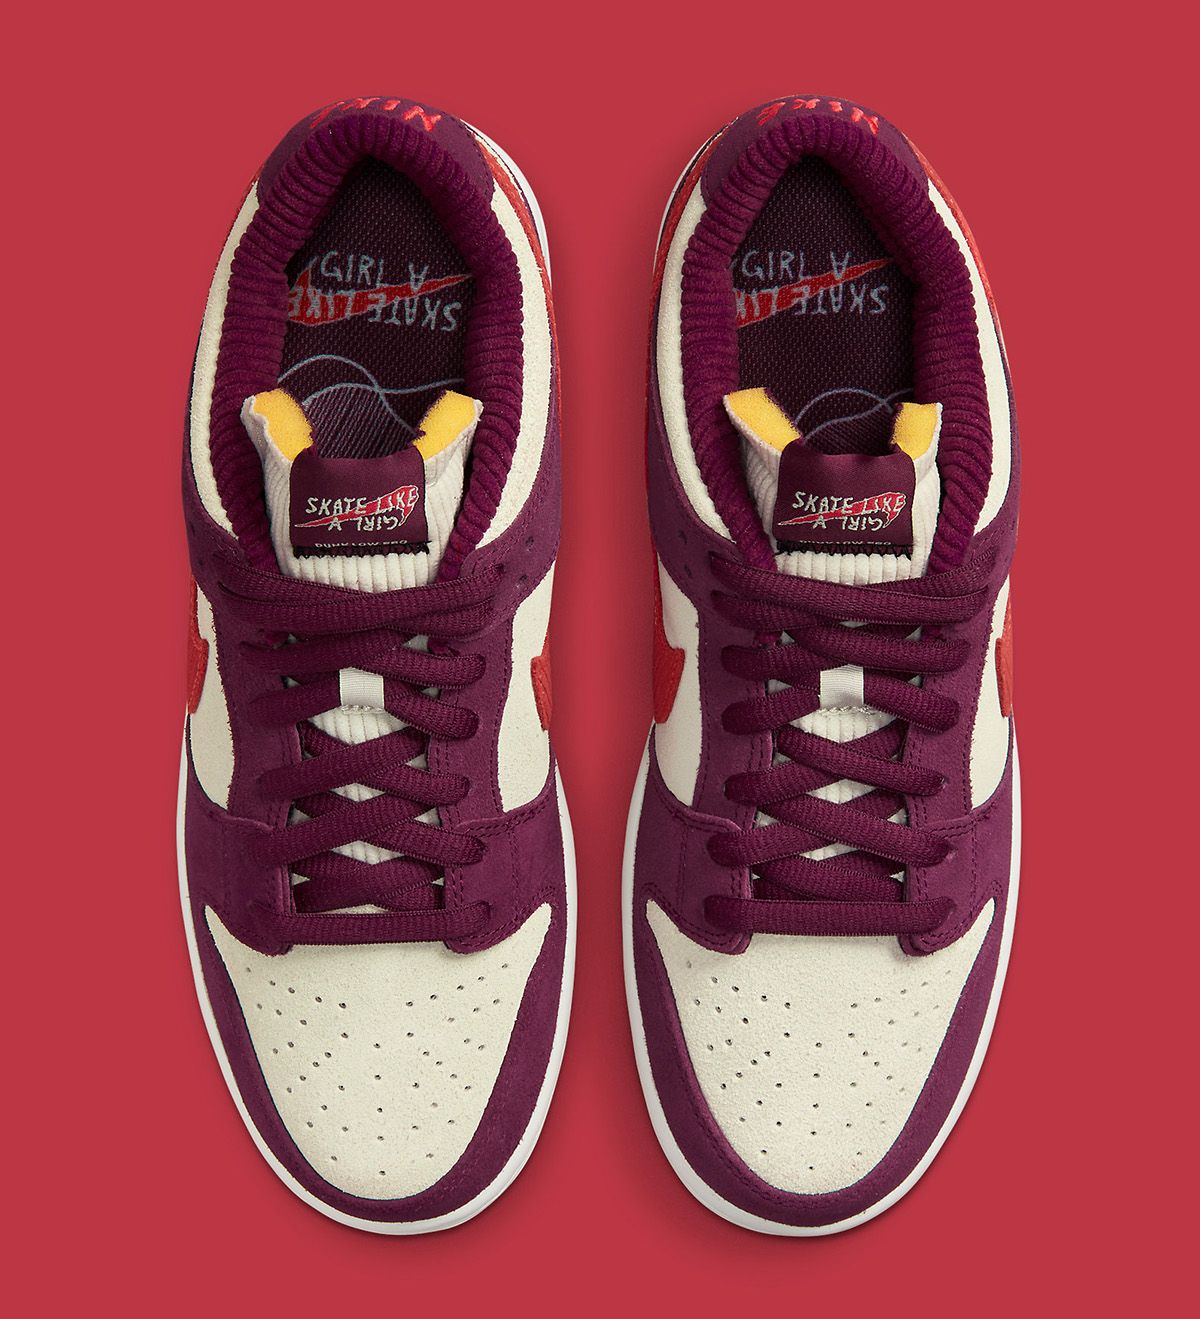 Where to Buy the Skate Like a Girl x Nike SB Dunk Low | House of